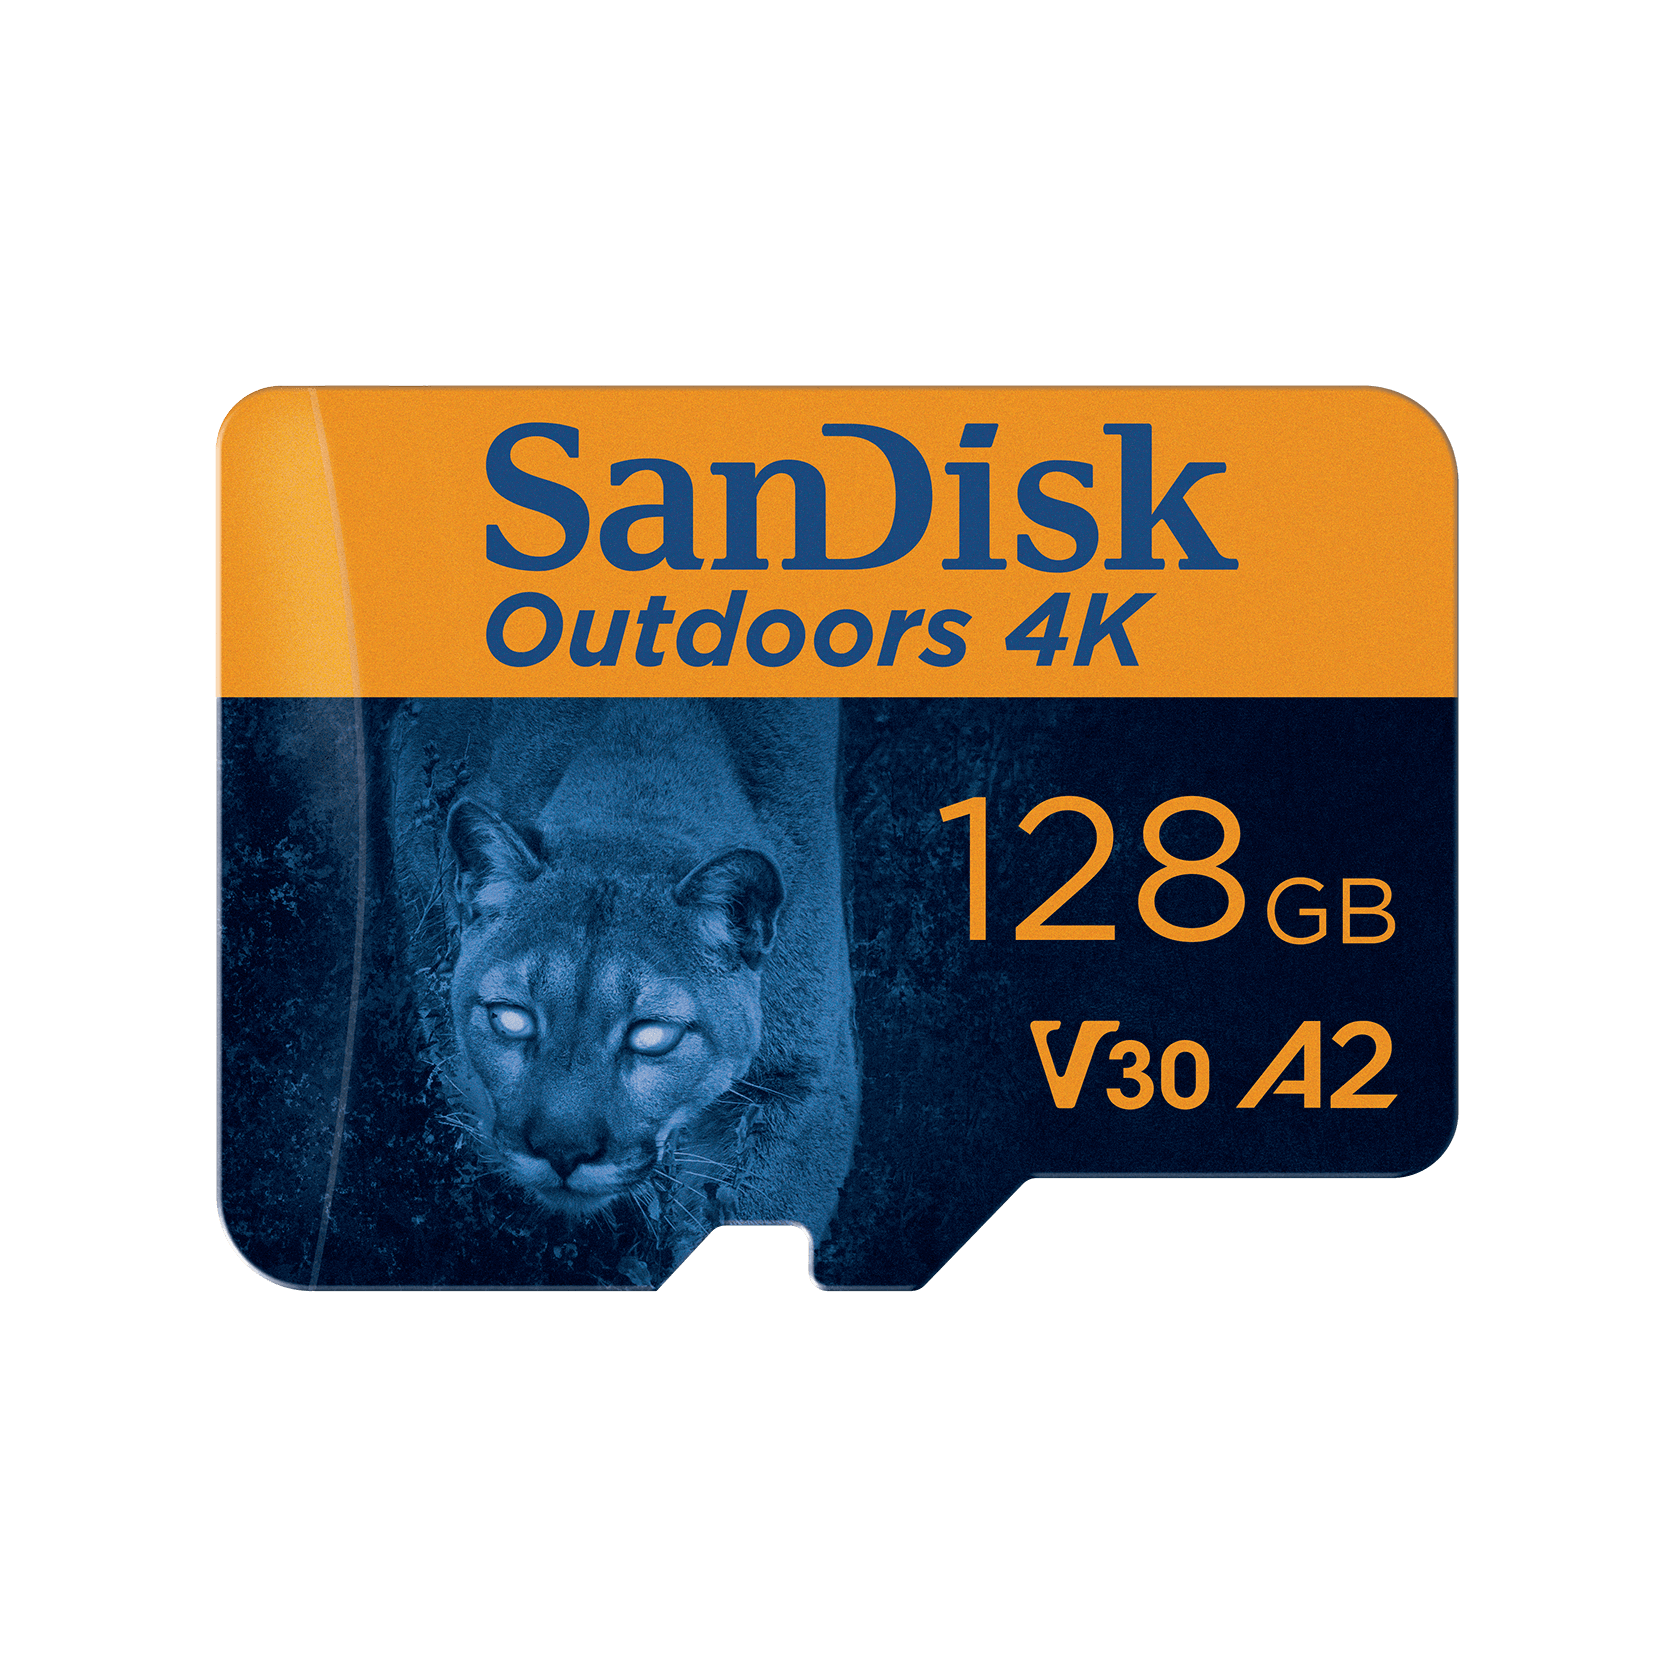 SanDisk Outdoors 4K MicroSDXC UHS-I Memory Card With SD Adapter - 128GB Two Pack - SDSQXAA-128G-GN6VT